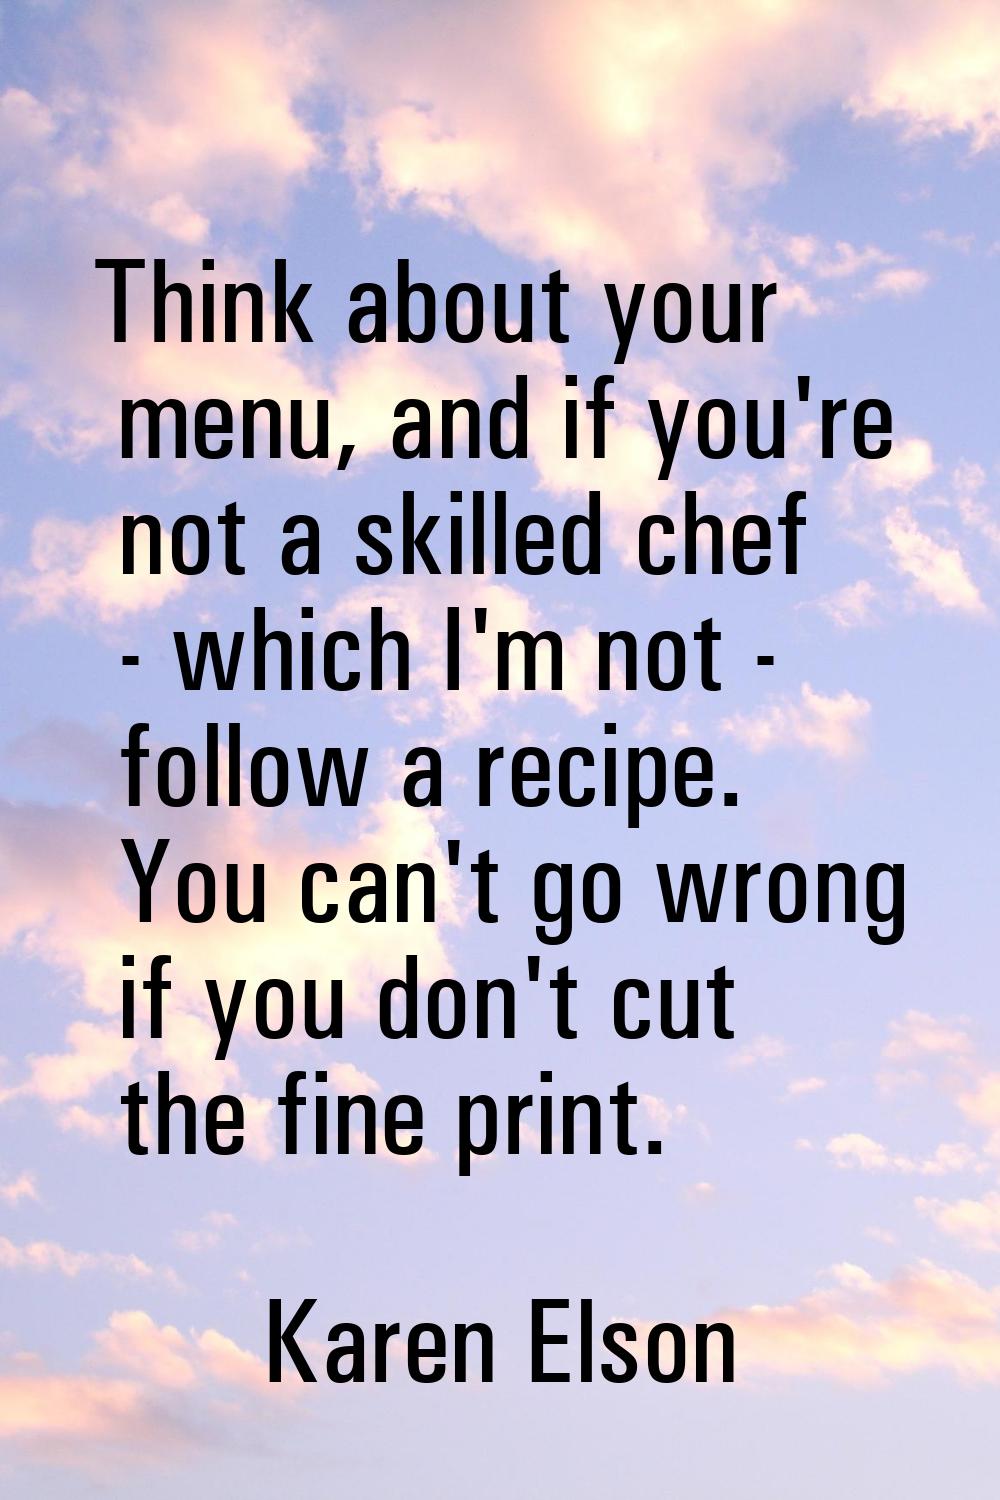 Think about your menu, and if you're not a skilled chef - which I'm not - follow a recipe. You can'